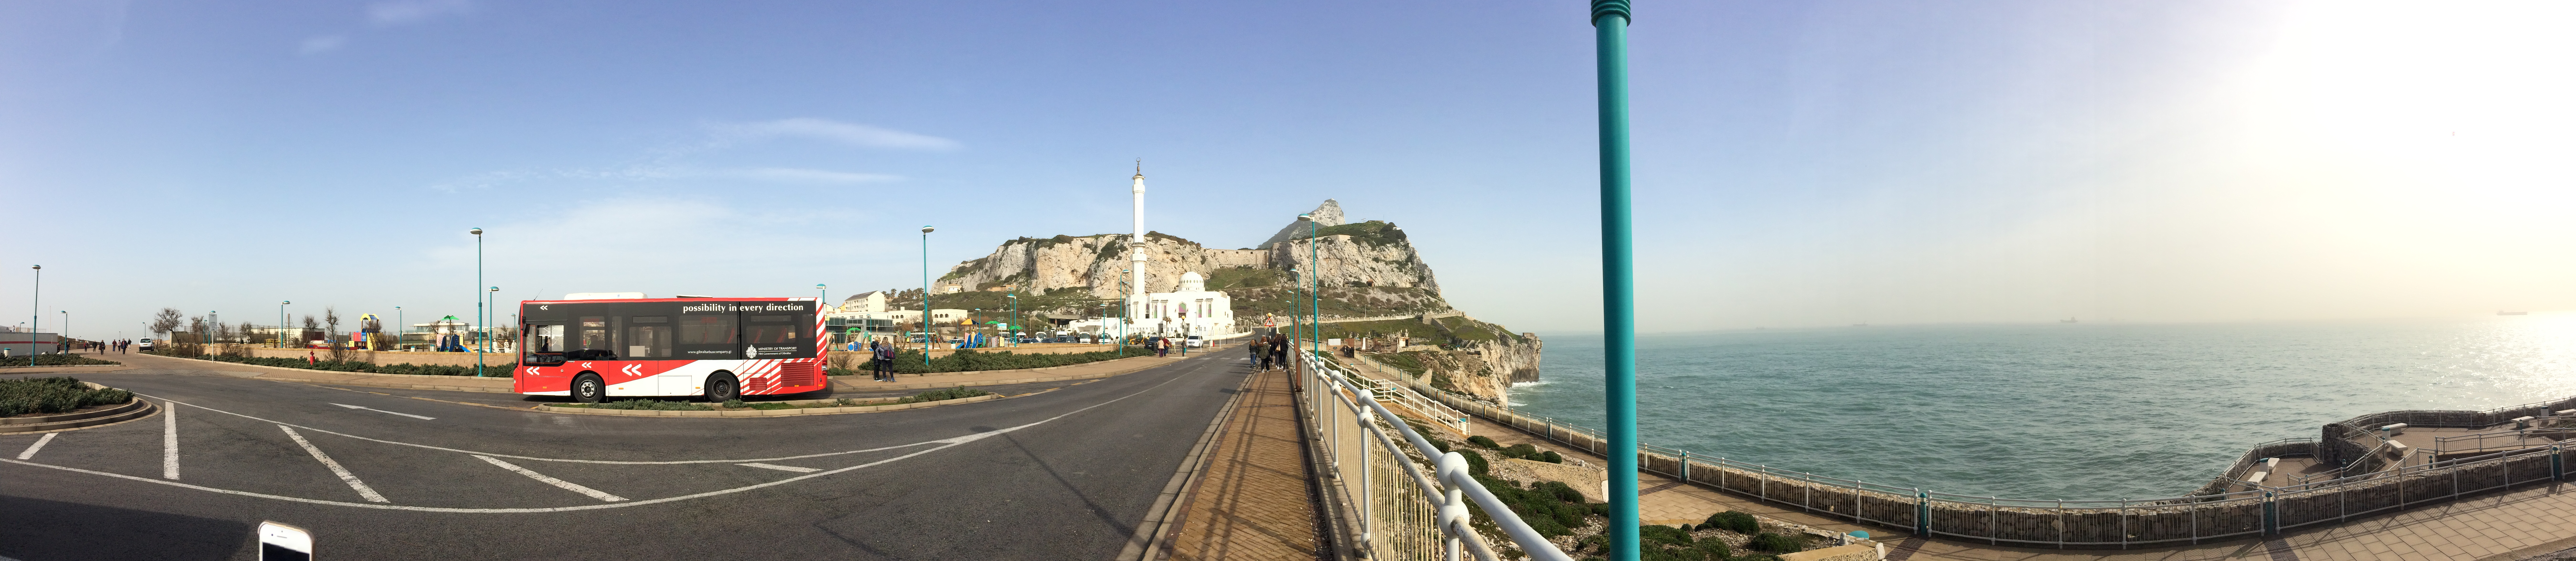 Image of the rock of Gibraltar